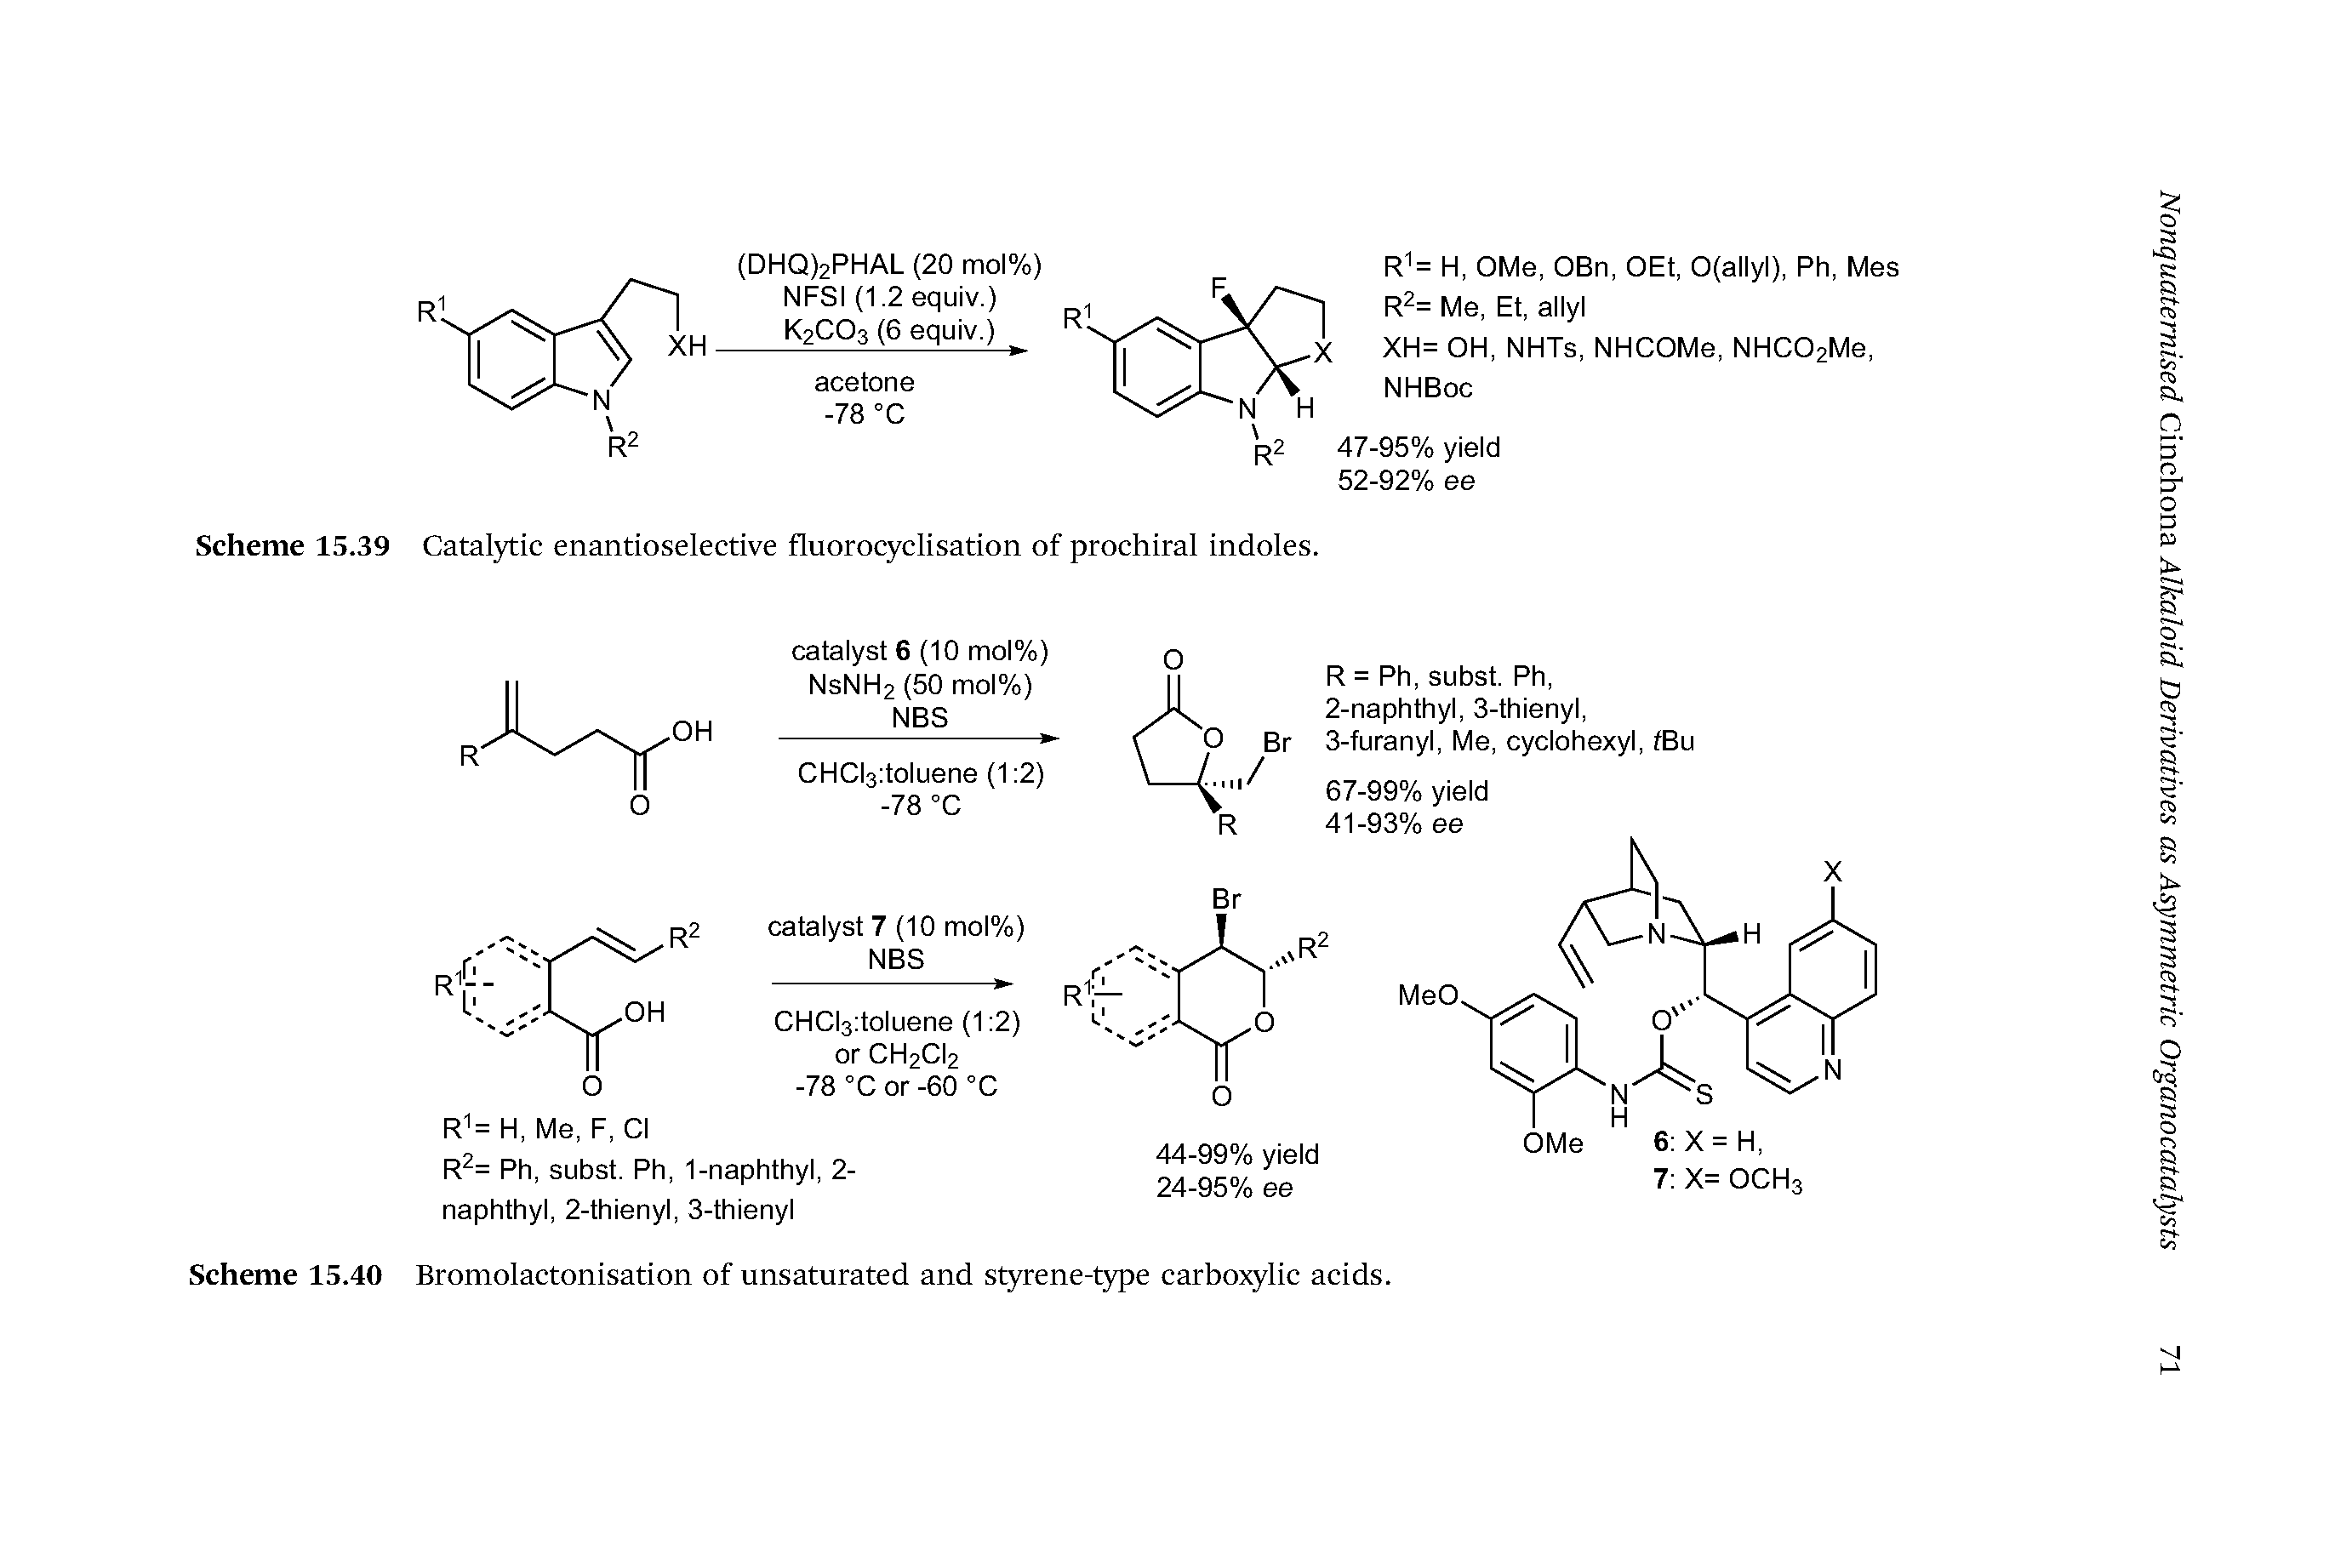 Scheme 15.40 Bromolactonisation of unsaturated and styrene-type carboxylic acids.